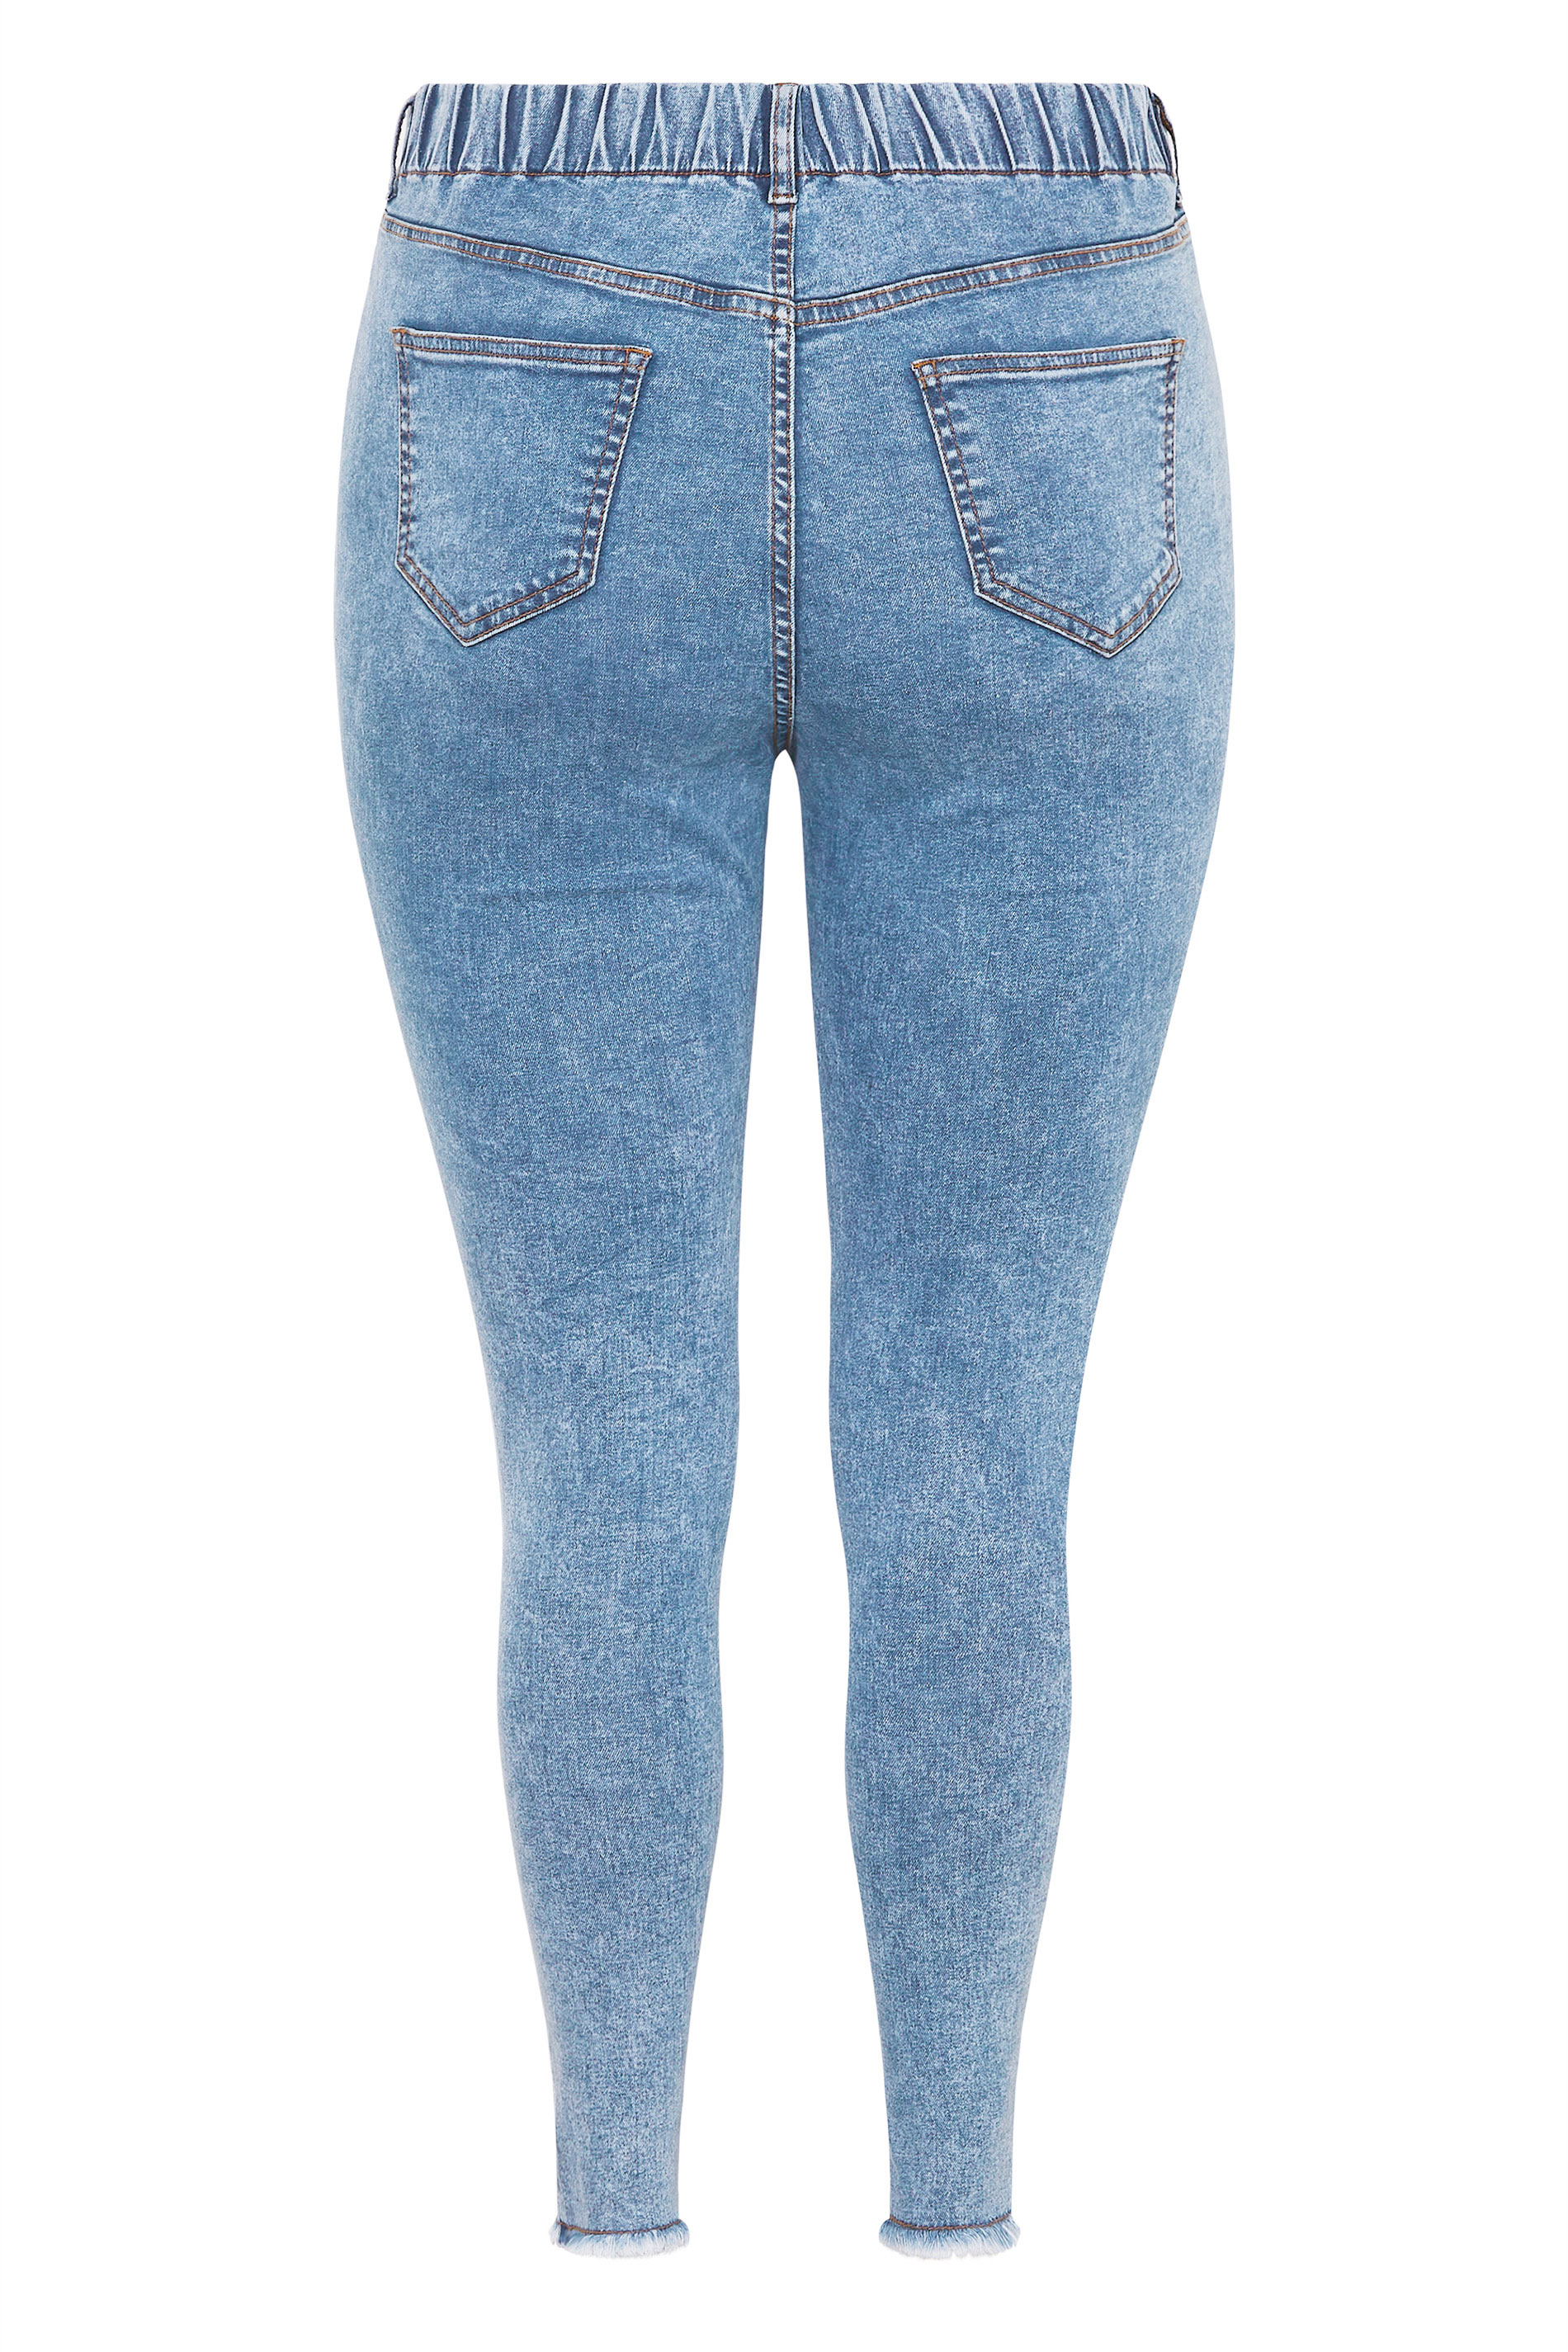 YOURS Curve Washed Blue Frayed Ripped Stretch GRACE Jeggings